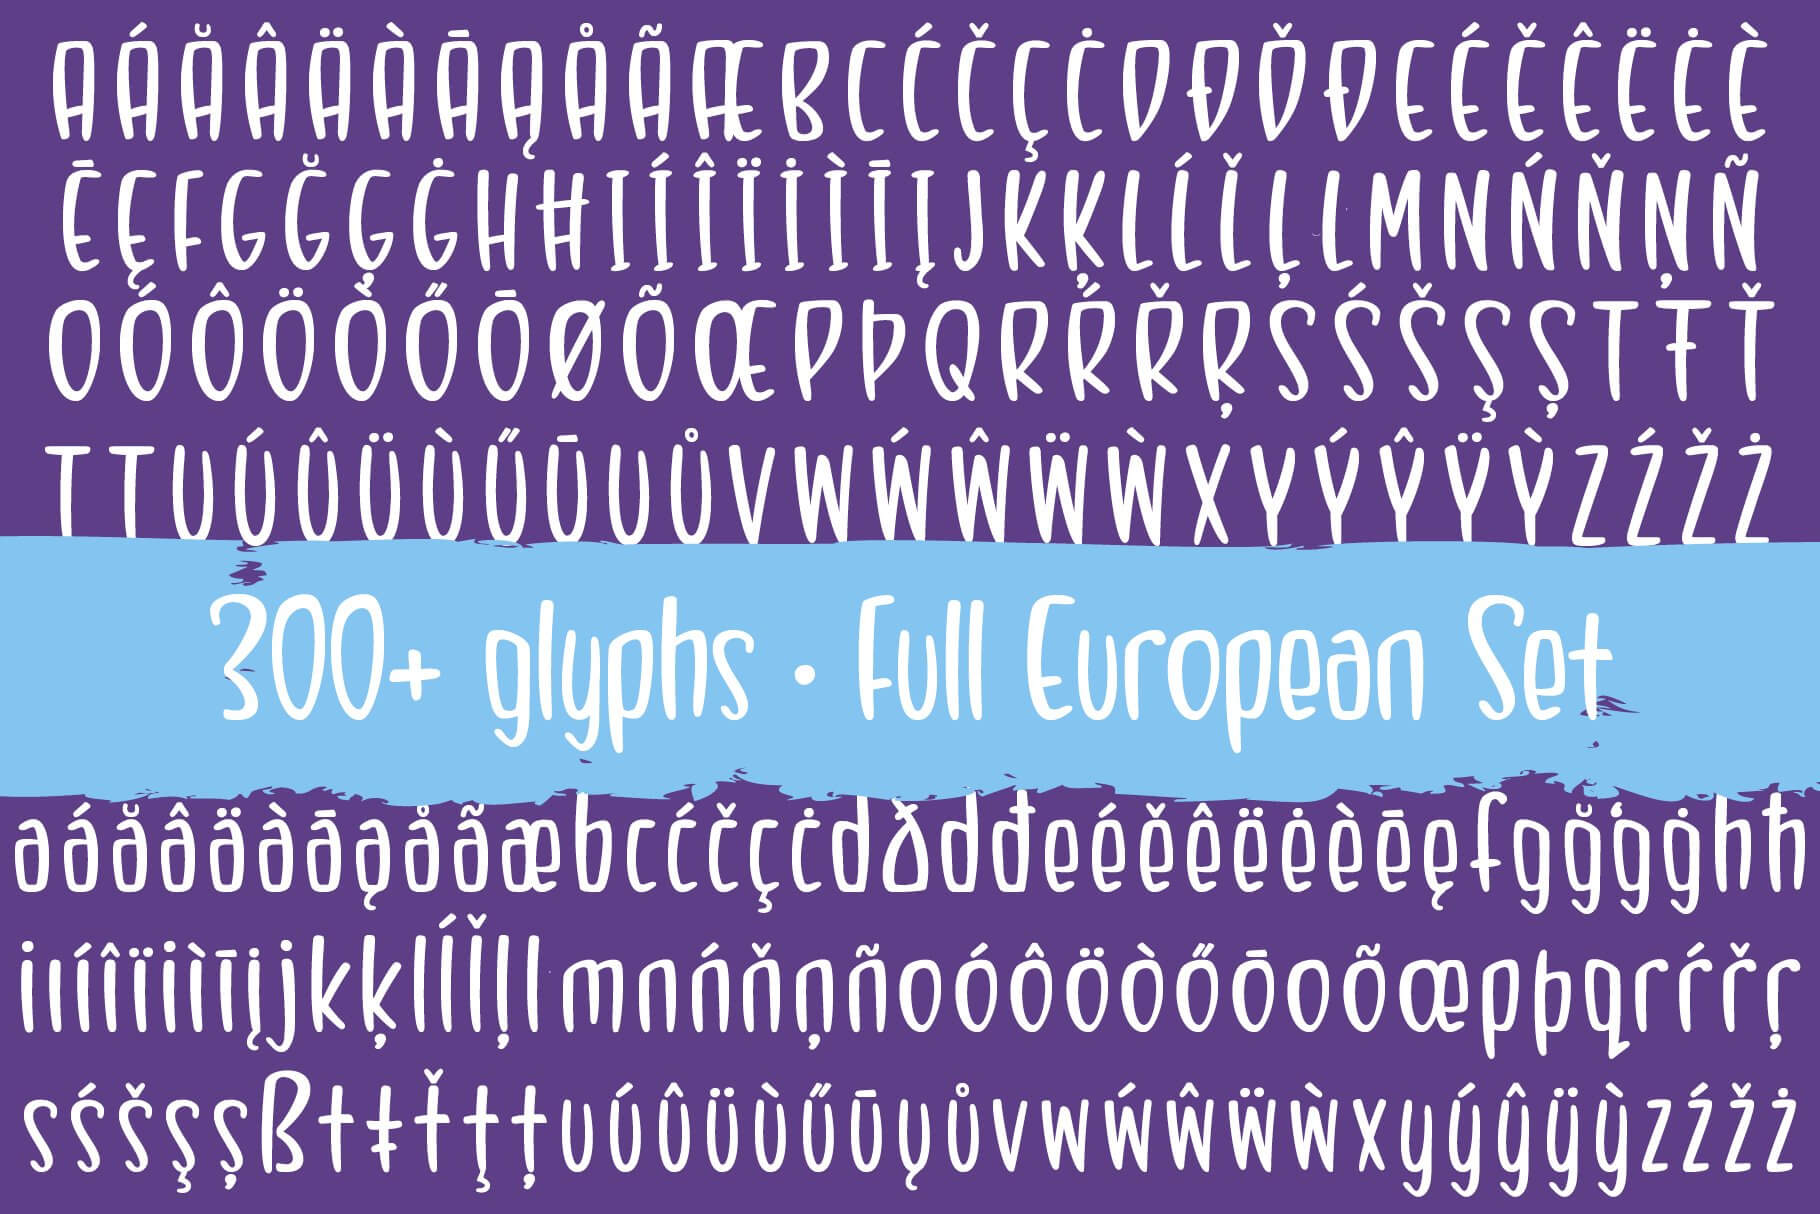 bombleberry playful and tasty handwritten font all multilingual symbols example.